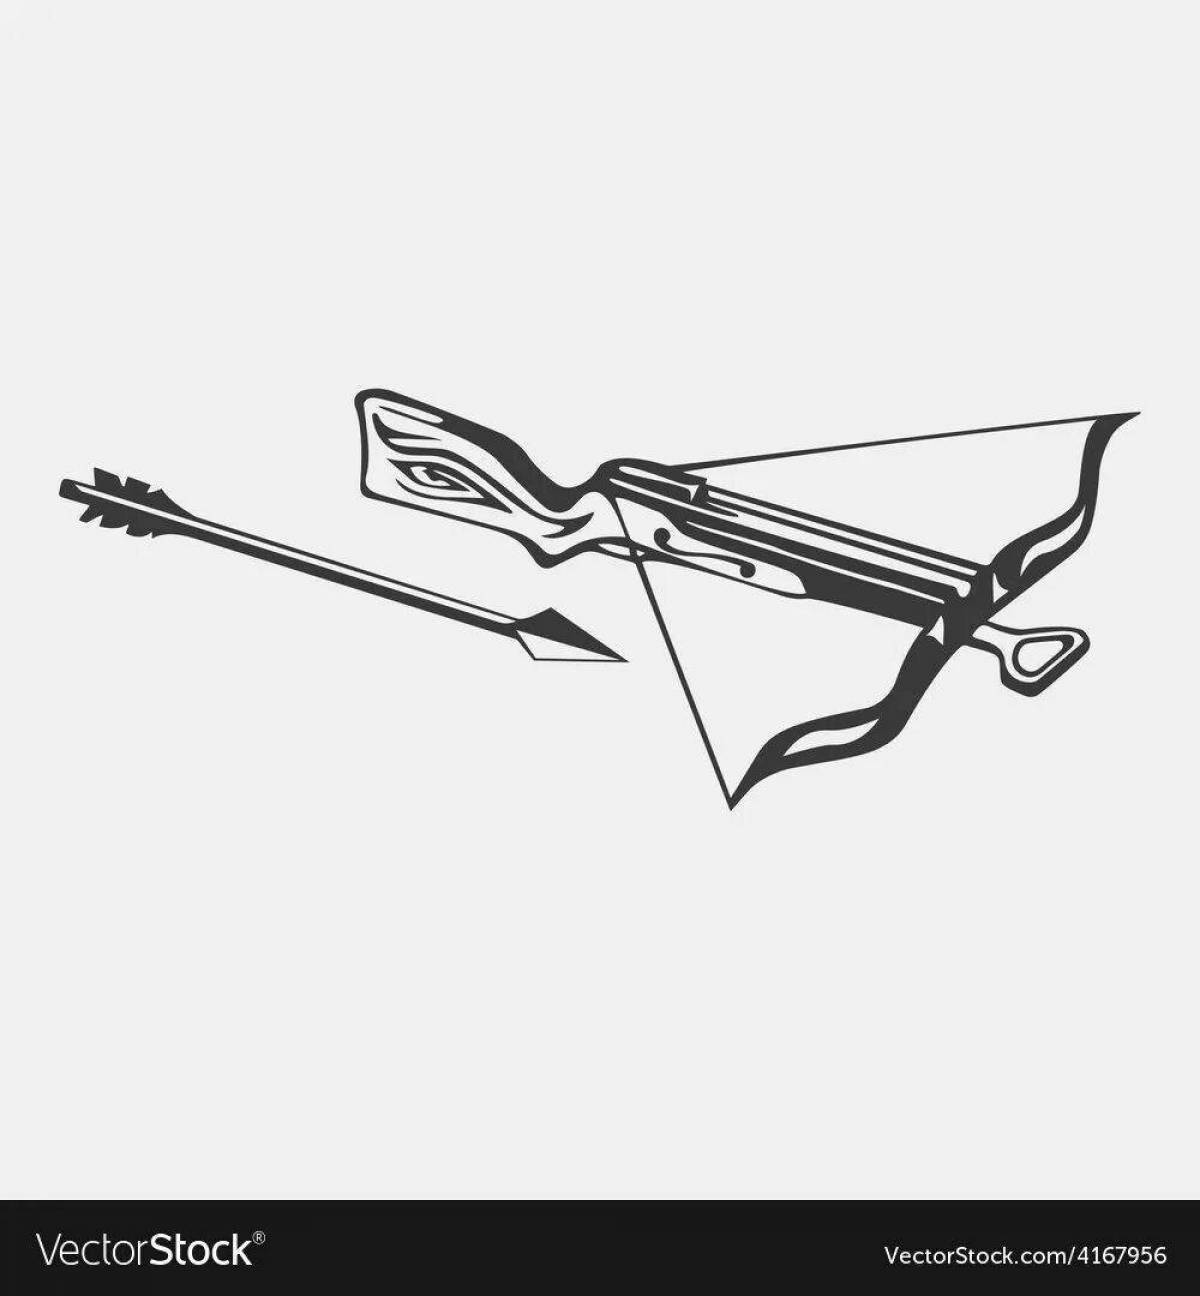 Amazing crossbow coloring for kids